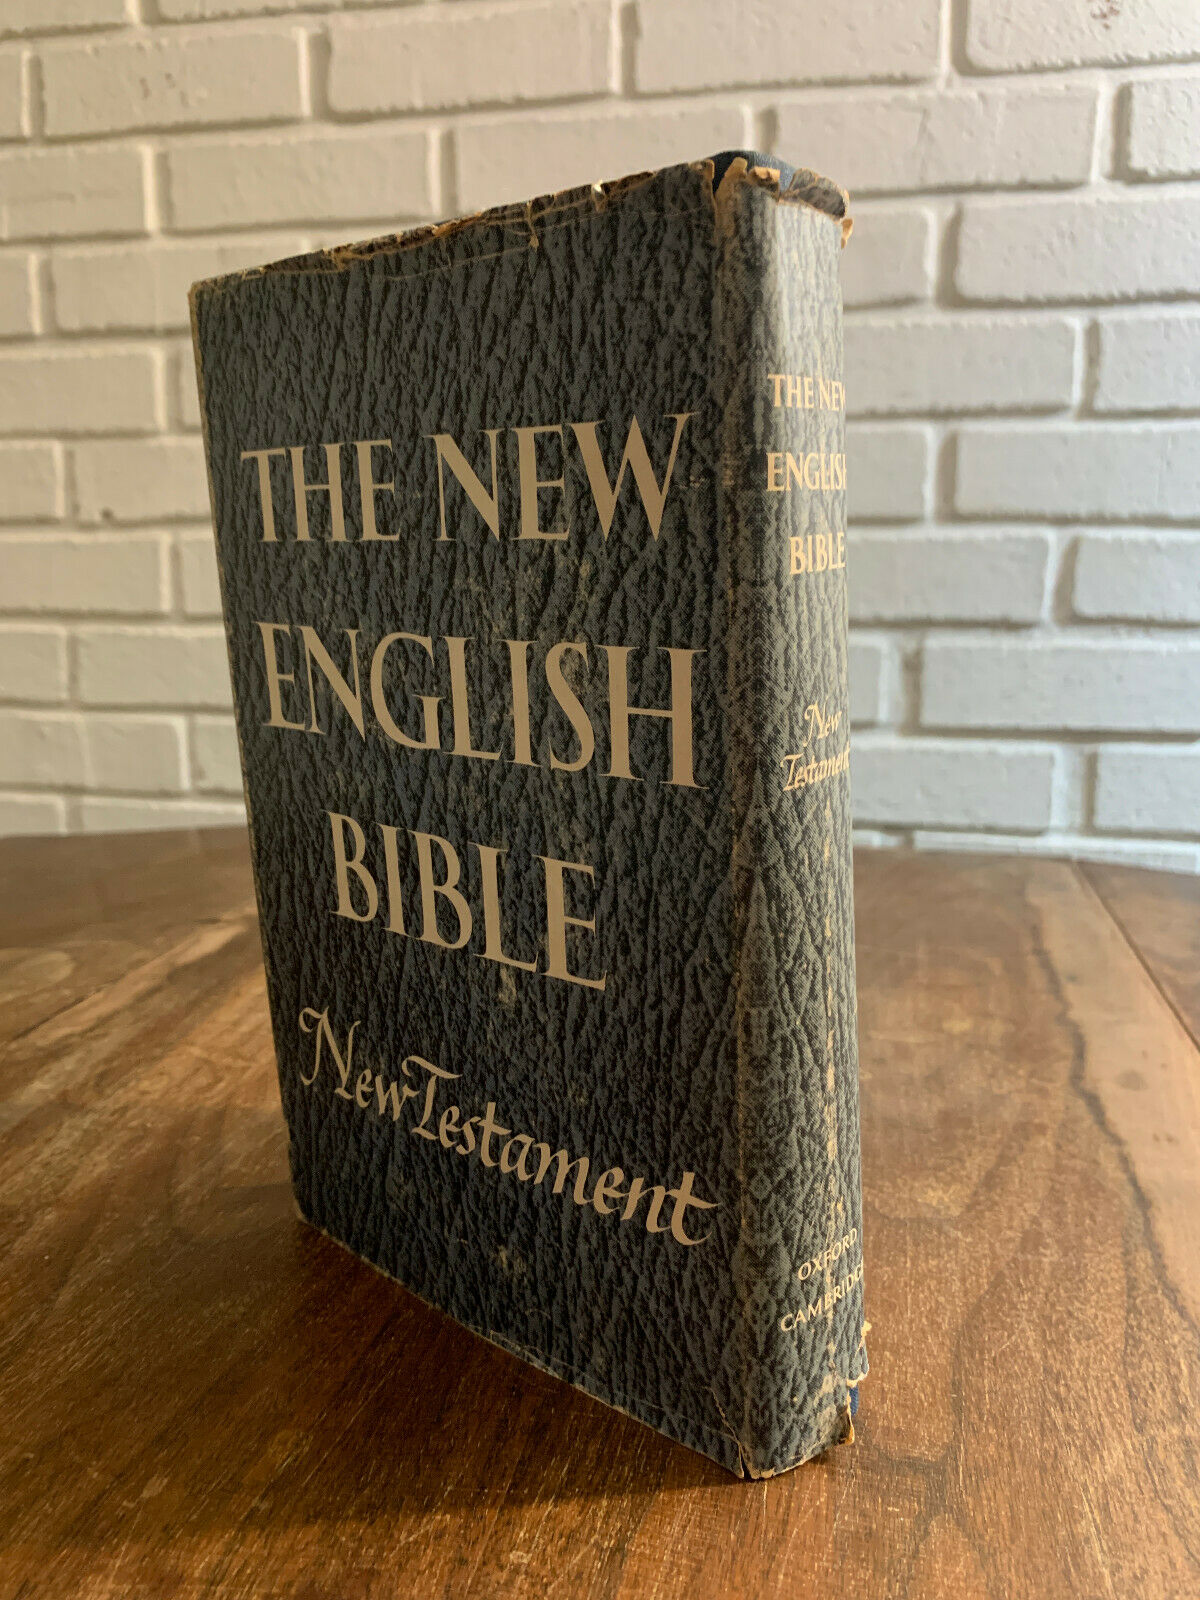 The New English Bible  - New Testament - 1961 (W4)